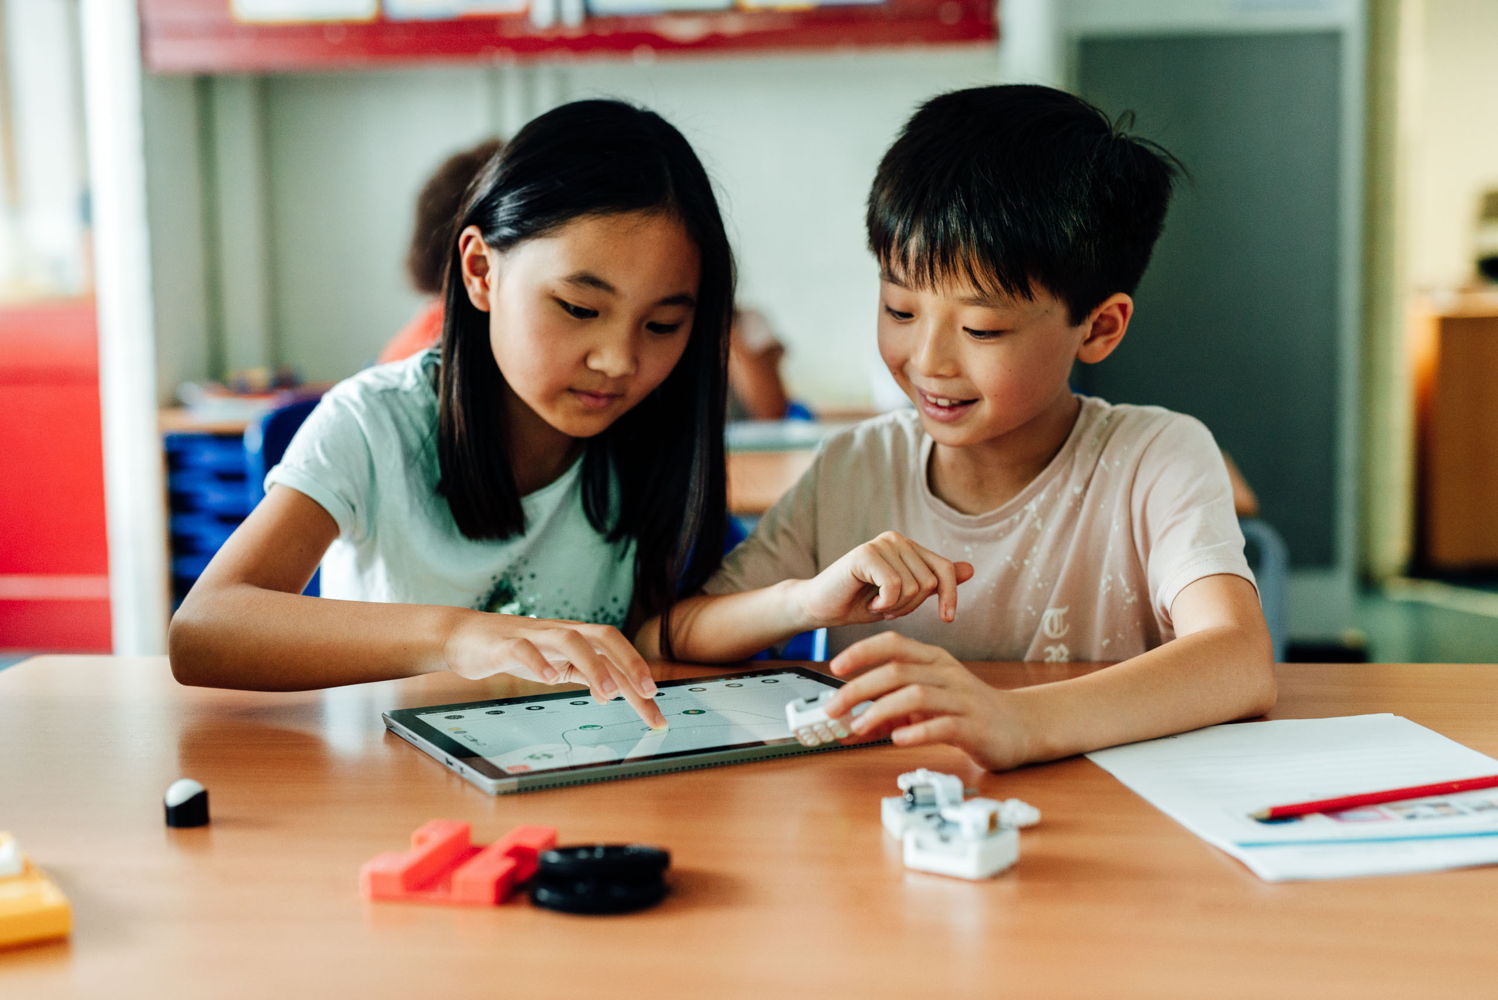 Learning to code teaches more than technology skills. Hands-on maker kits like those from SAM Labs can help young learners design and build tools while developing problem-solving skills.